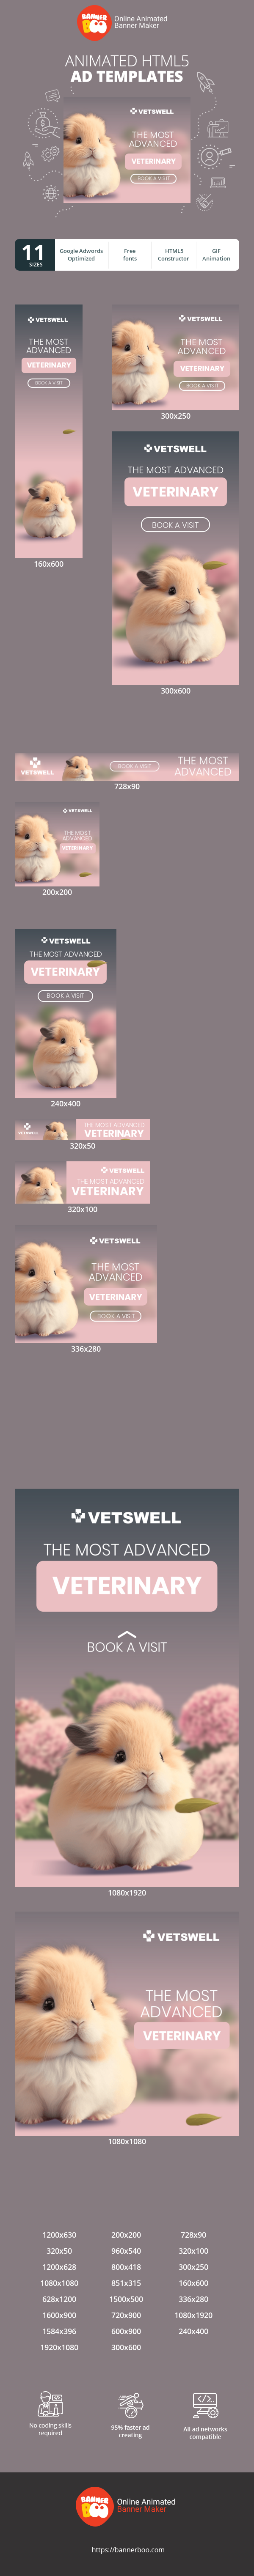 Banner ad template — The Most Advanced — Veterinary